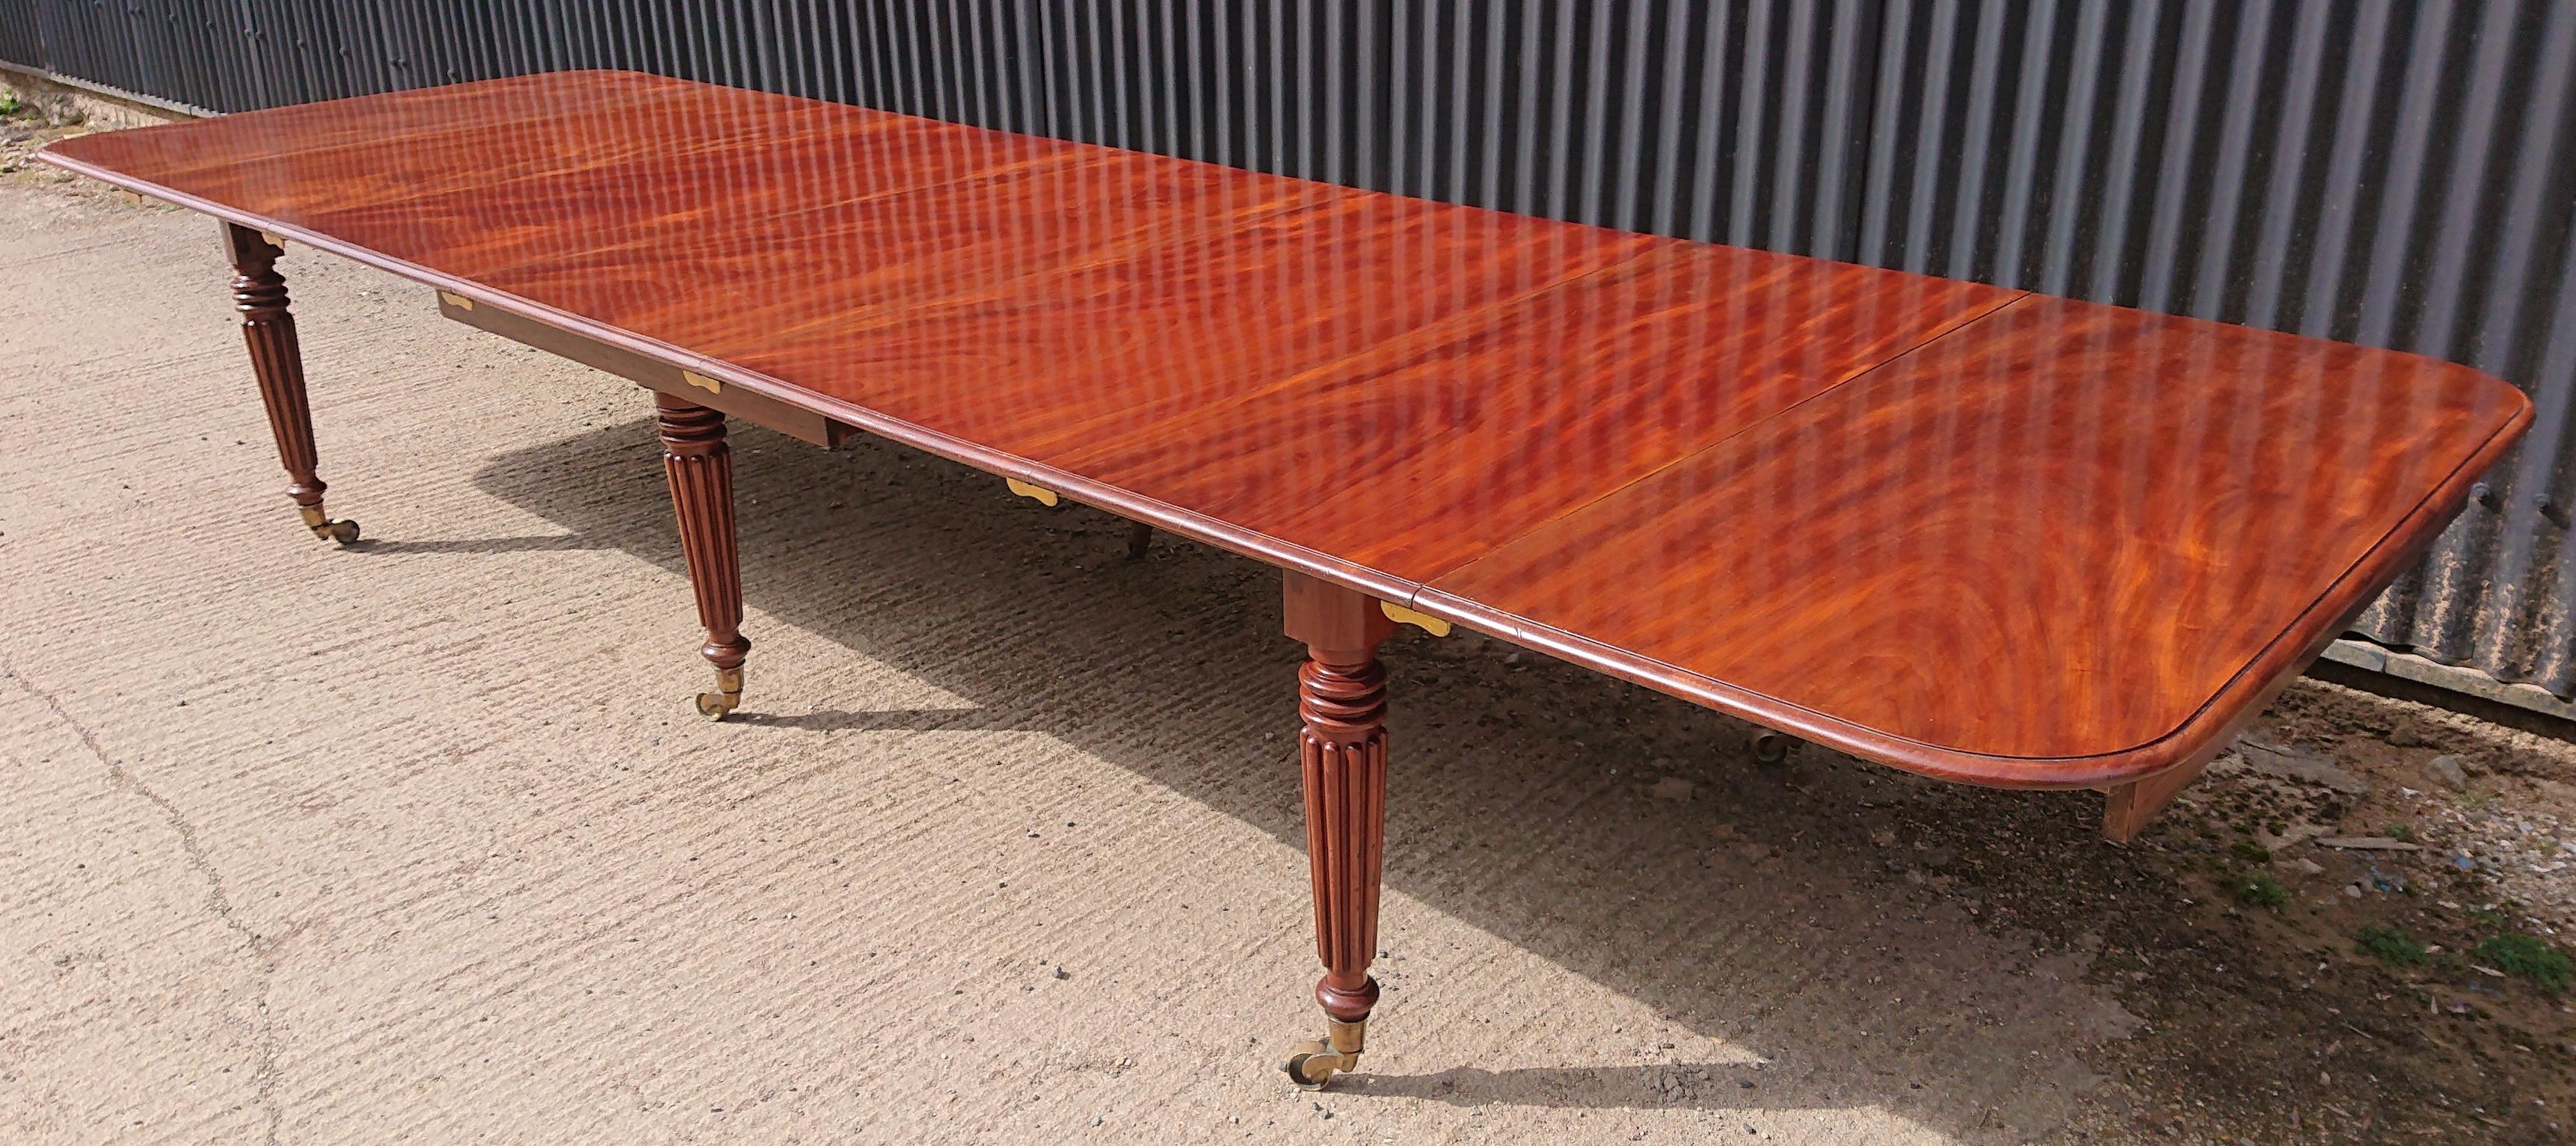 Early 19th Century Regency Mahogany Extending Dining Table Attributed to Gillows For Sale 1